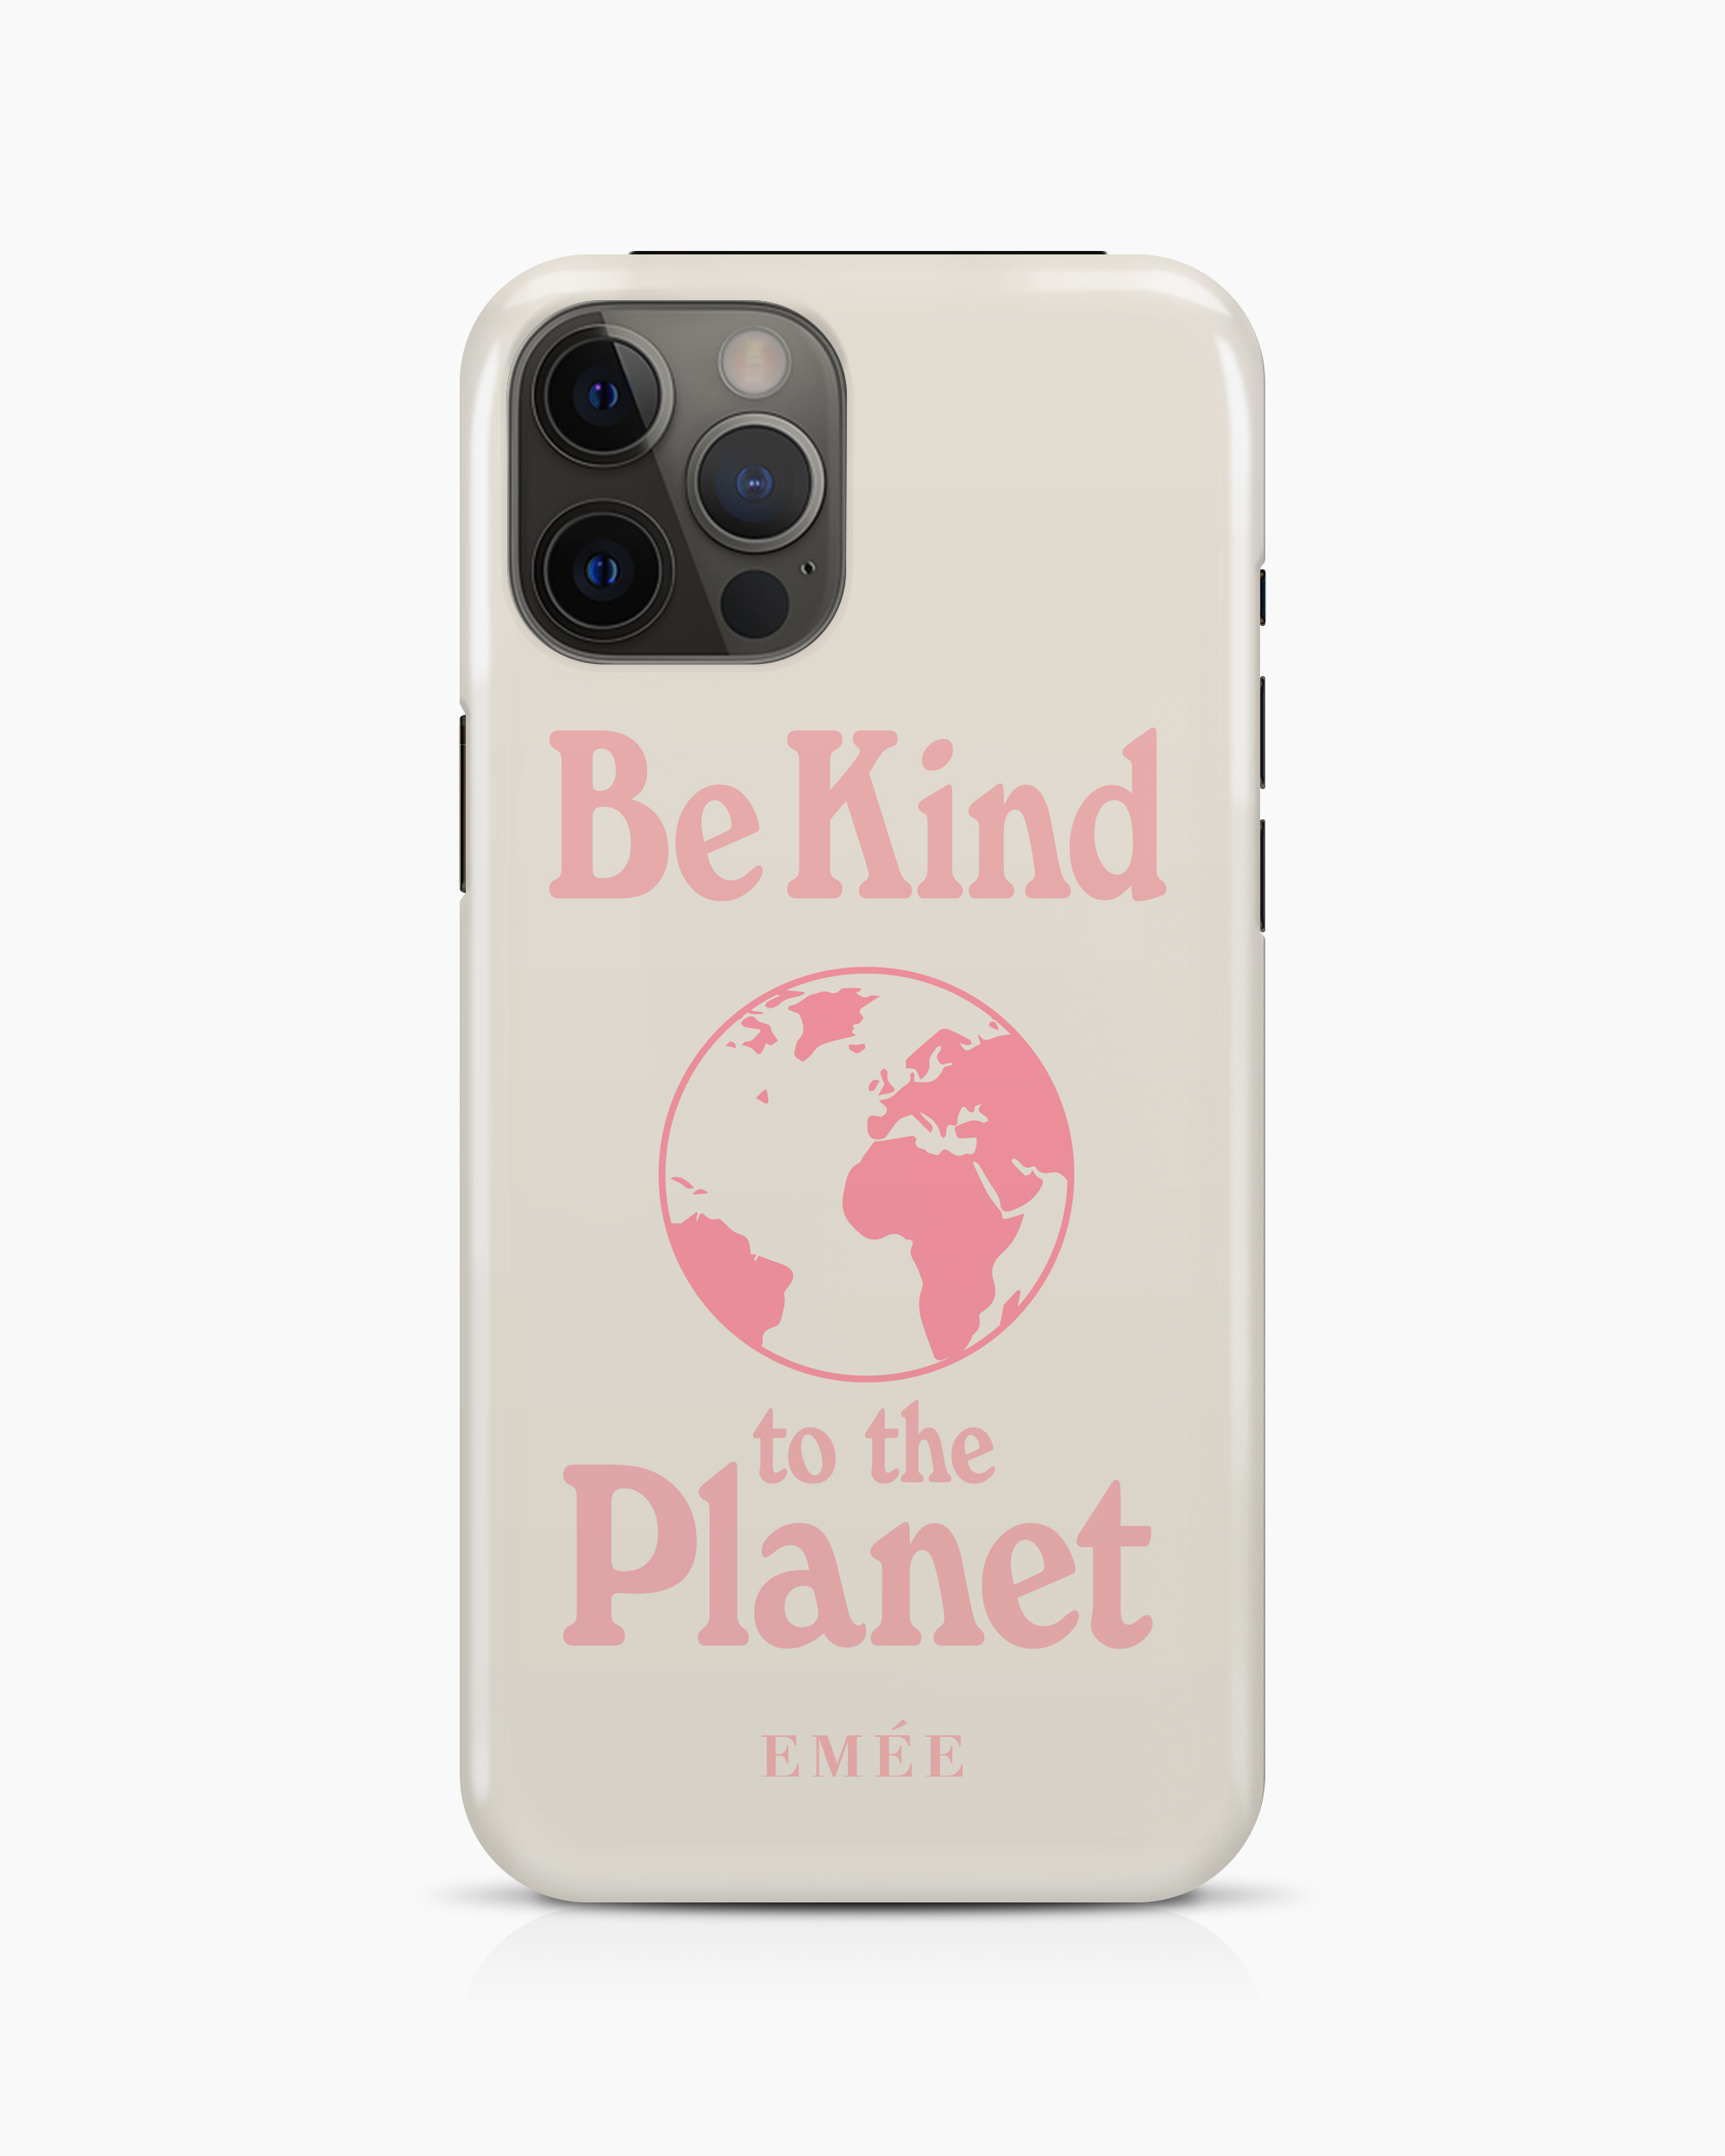 Be kind to the planet